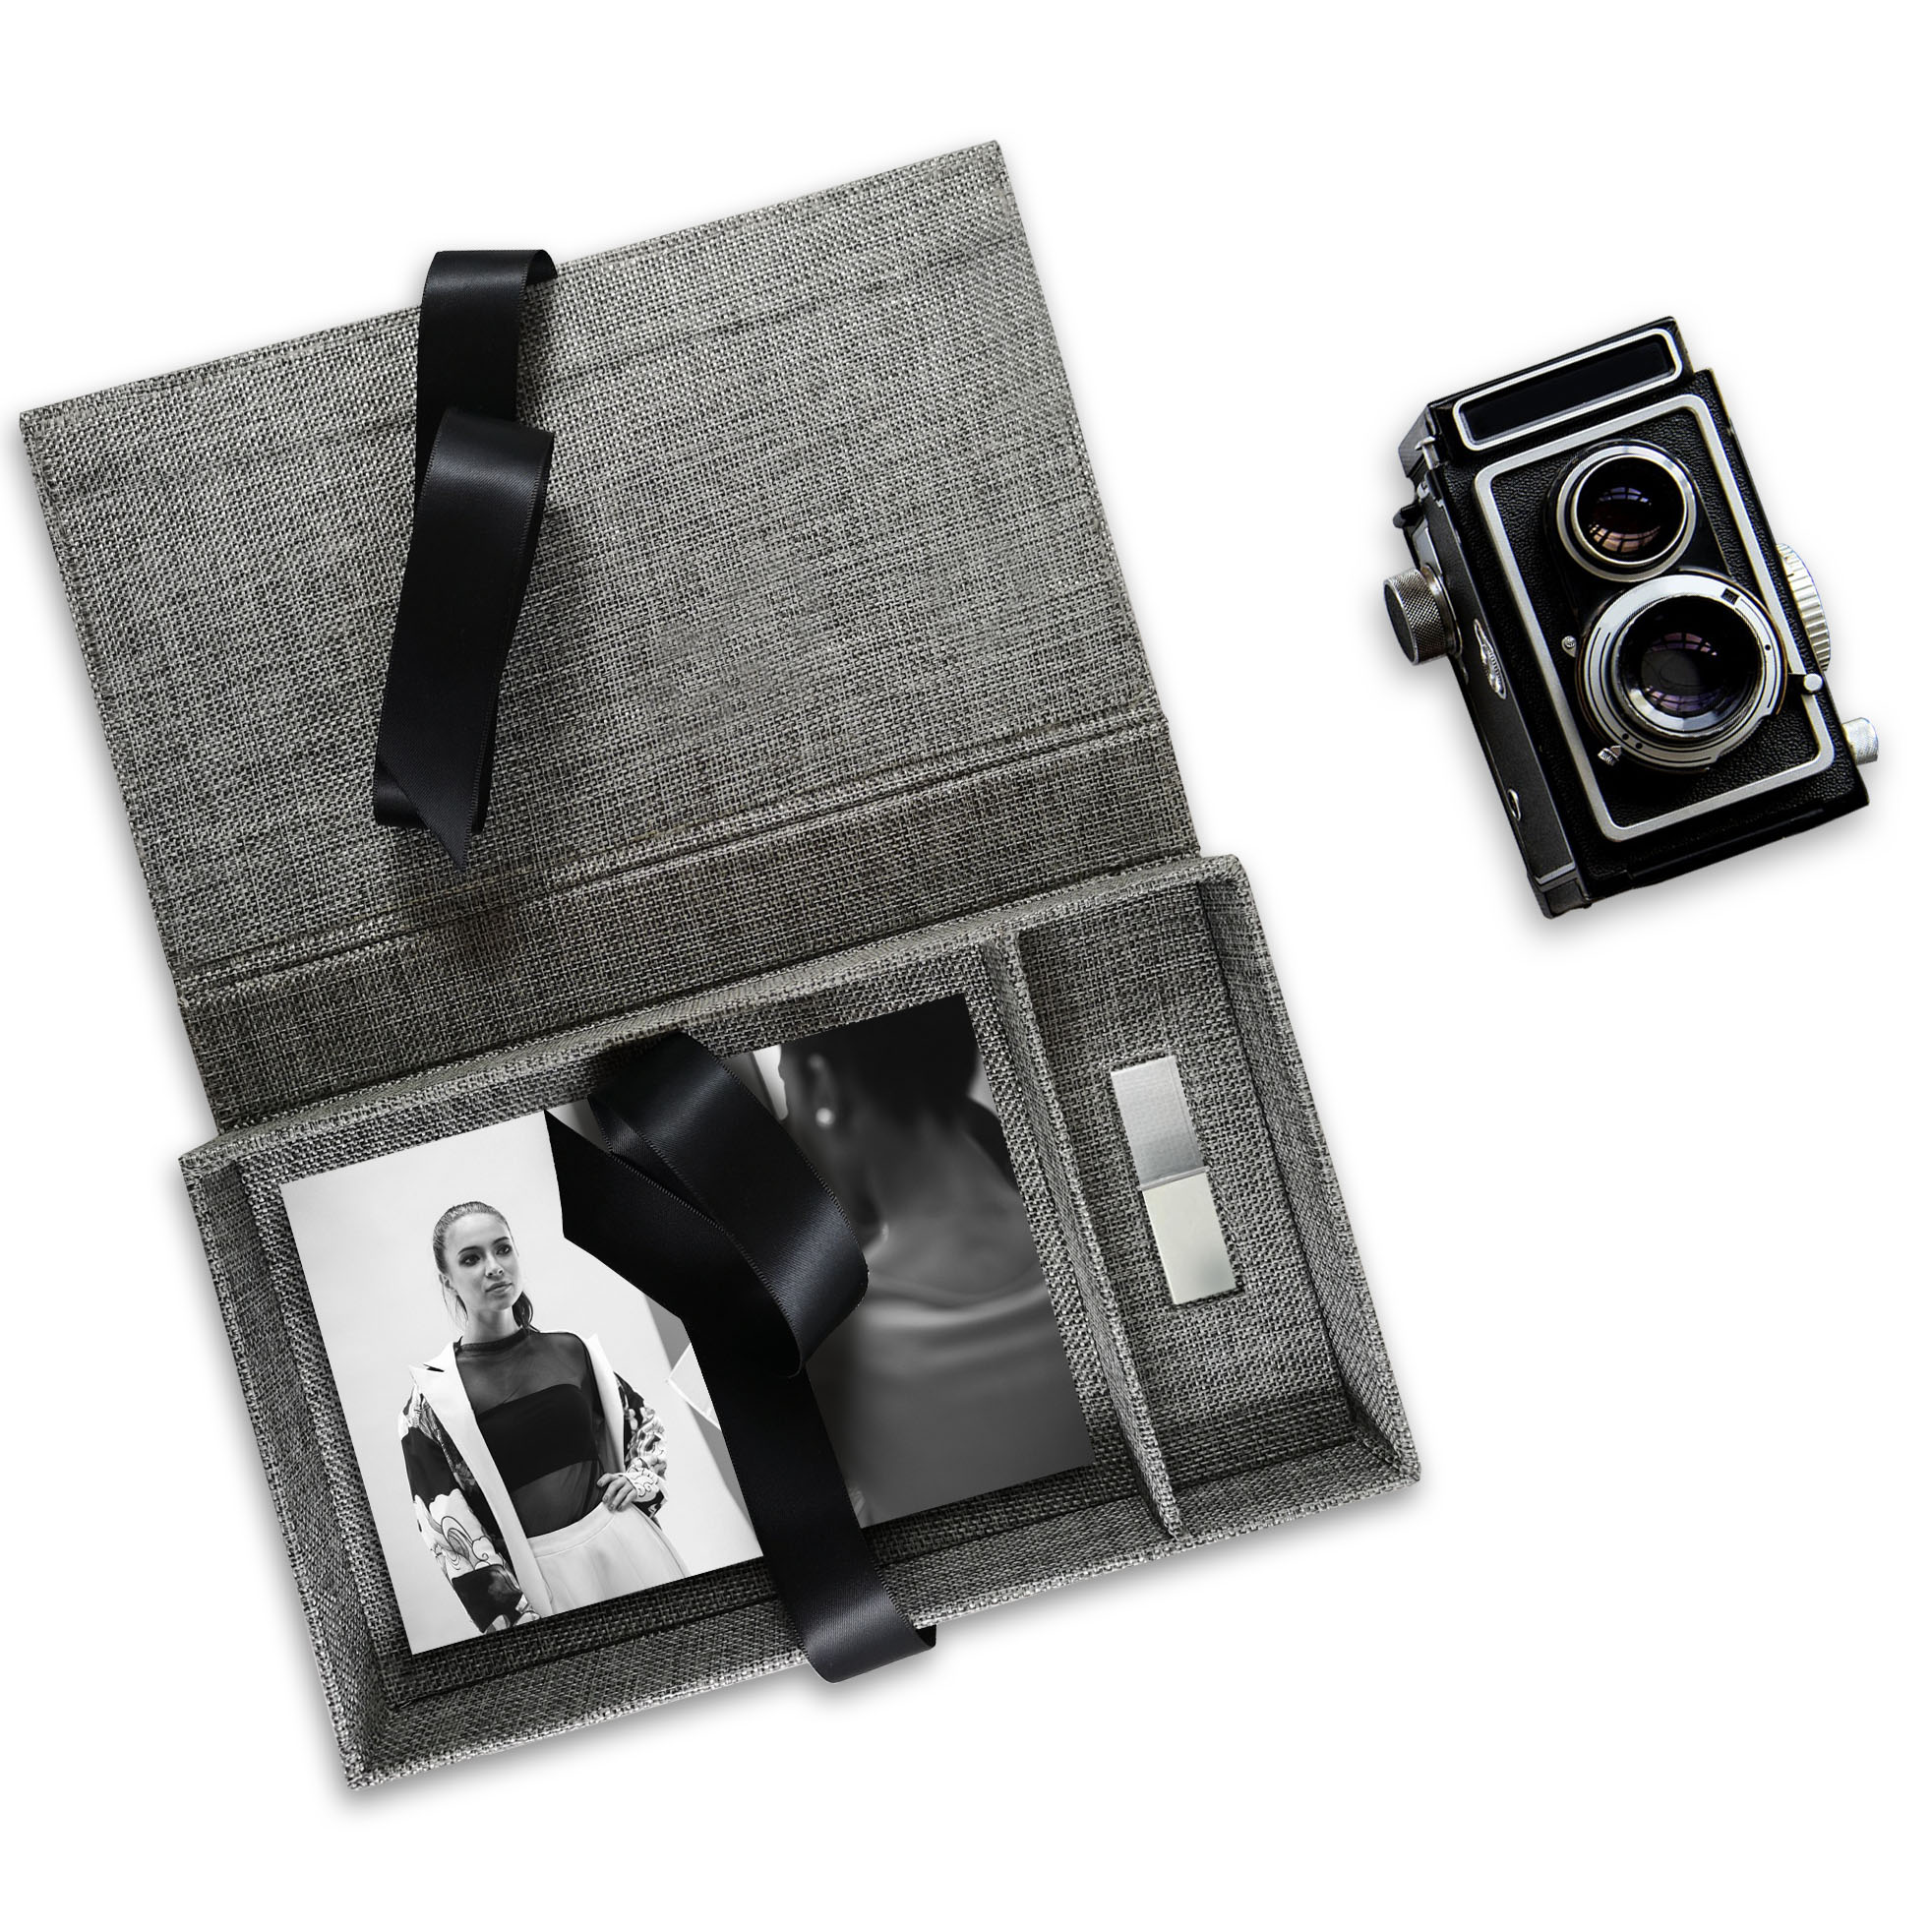 Picture shows a custom photo box in due-tone charcoal linen, recently developed for a client in Europe.